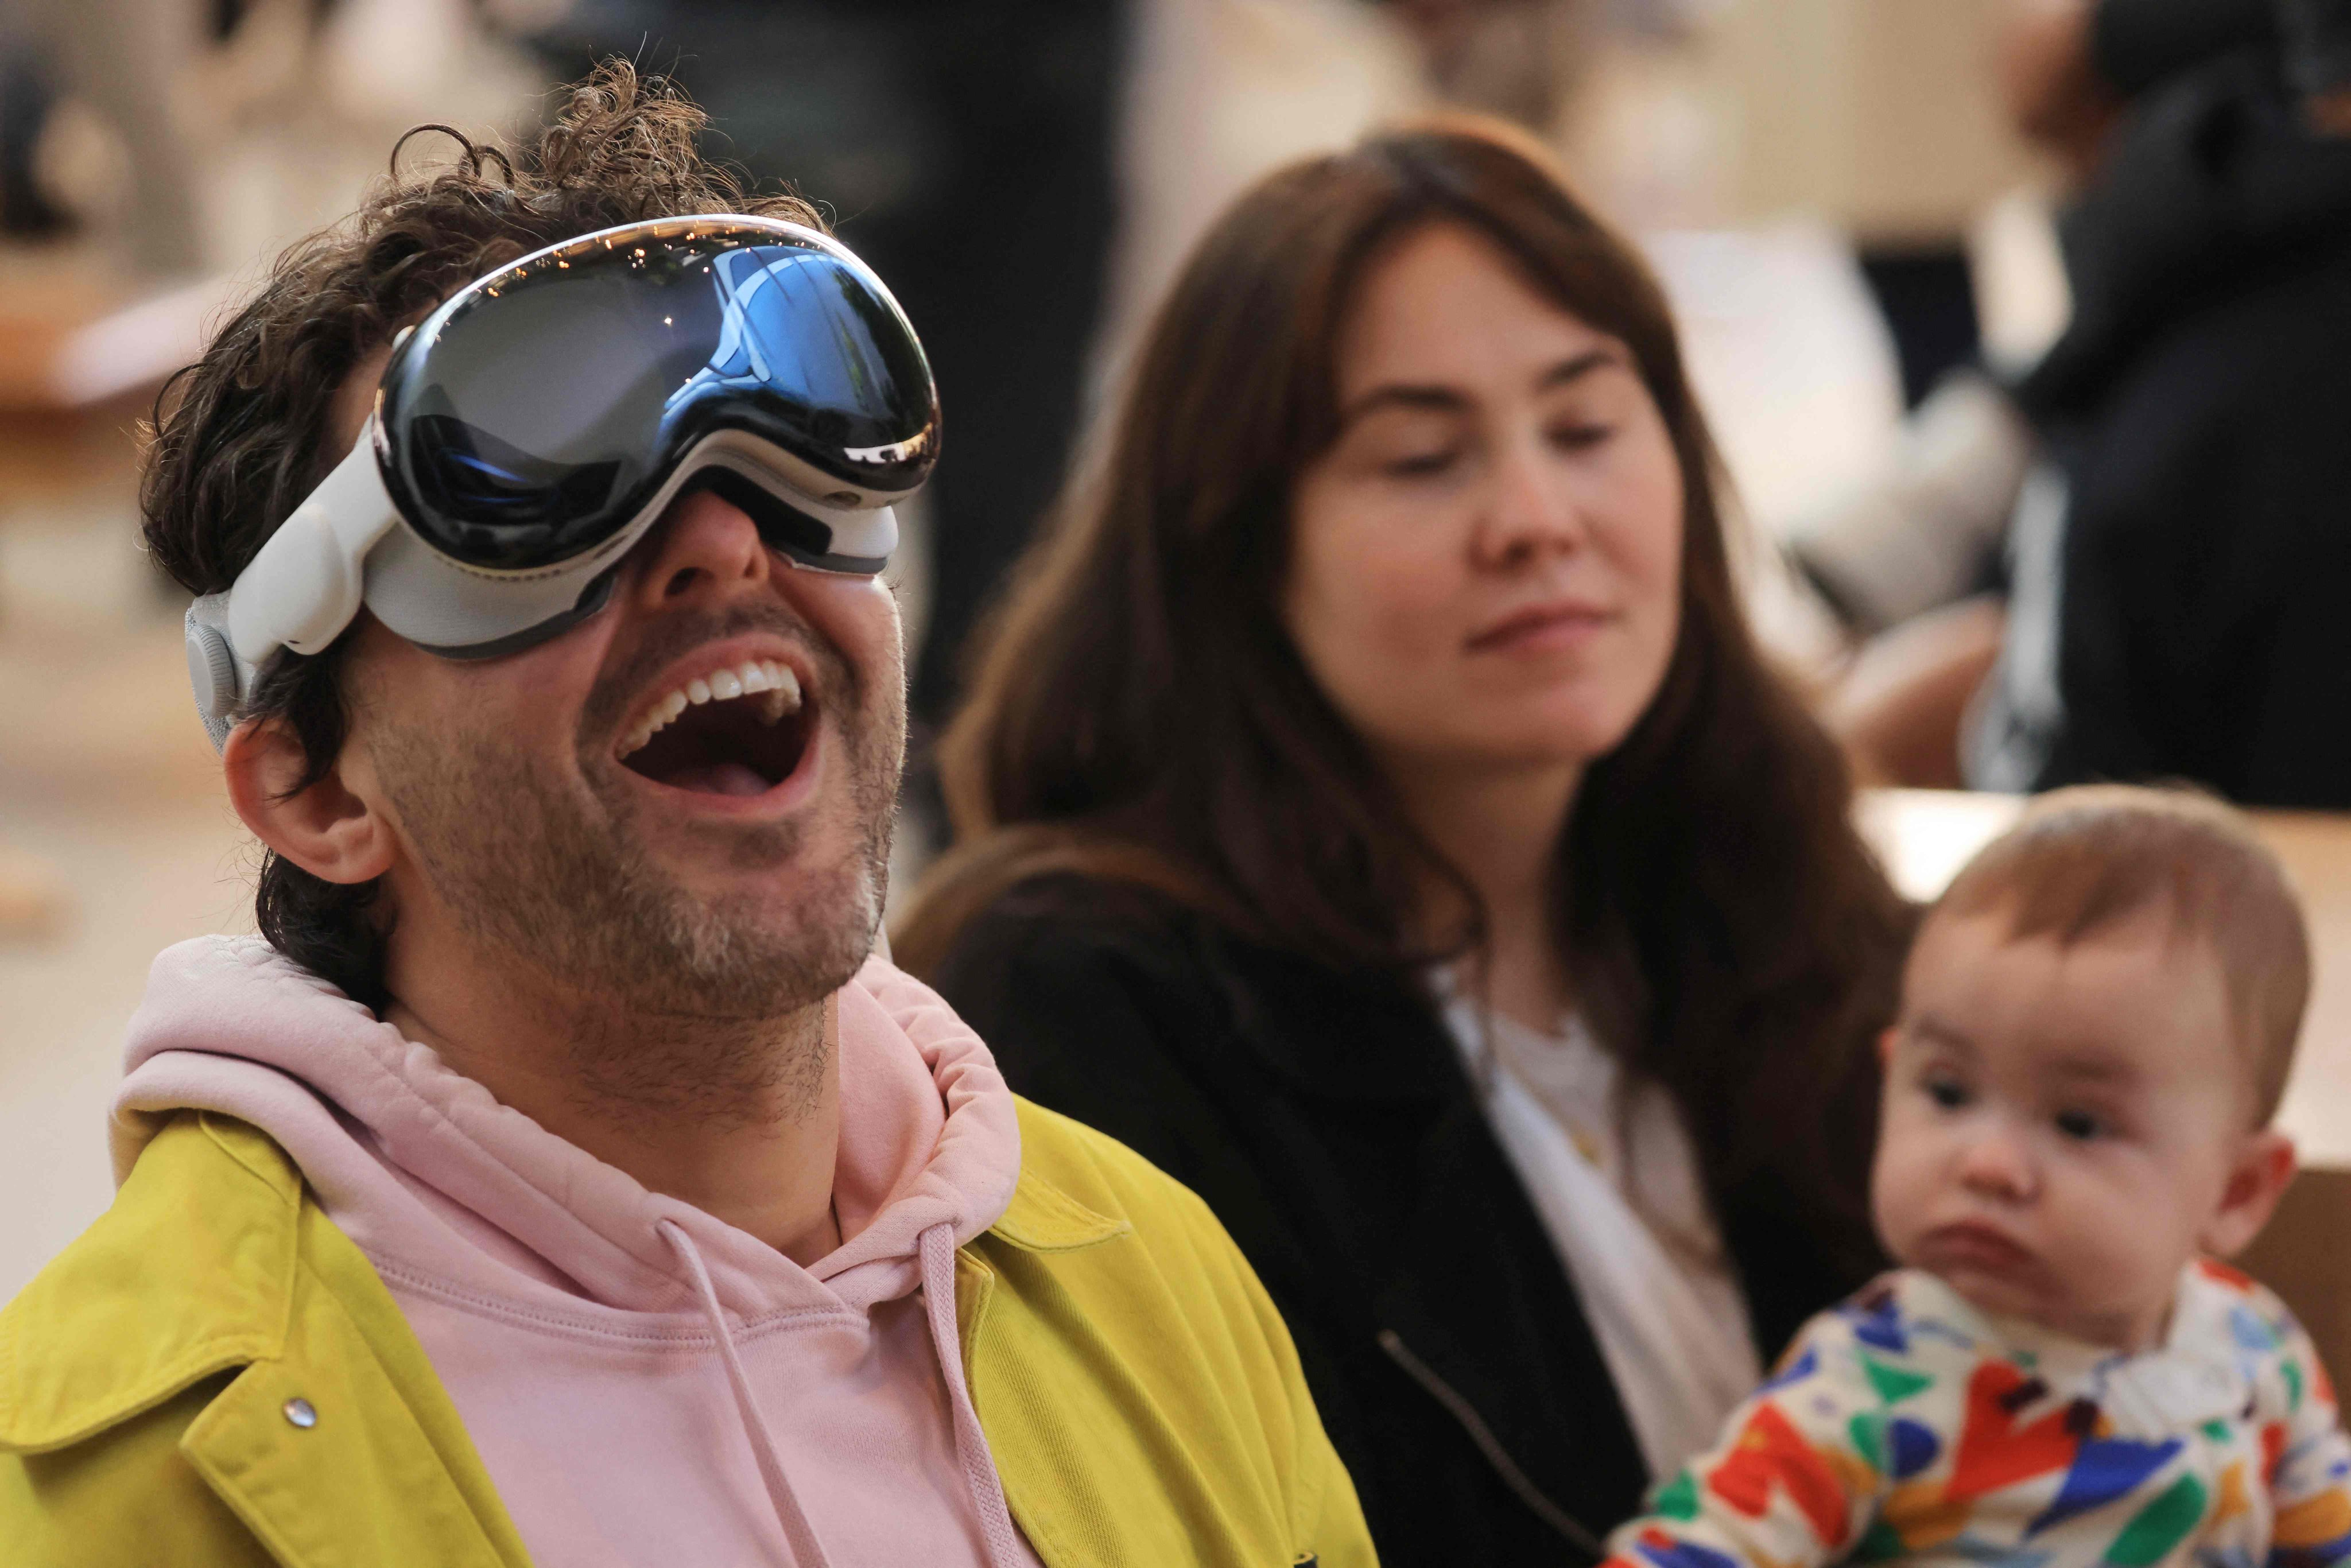 A customer tries on a Vision Pro at an Apple Store in Los Angeles, California. Photo: AFP